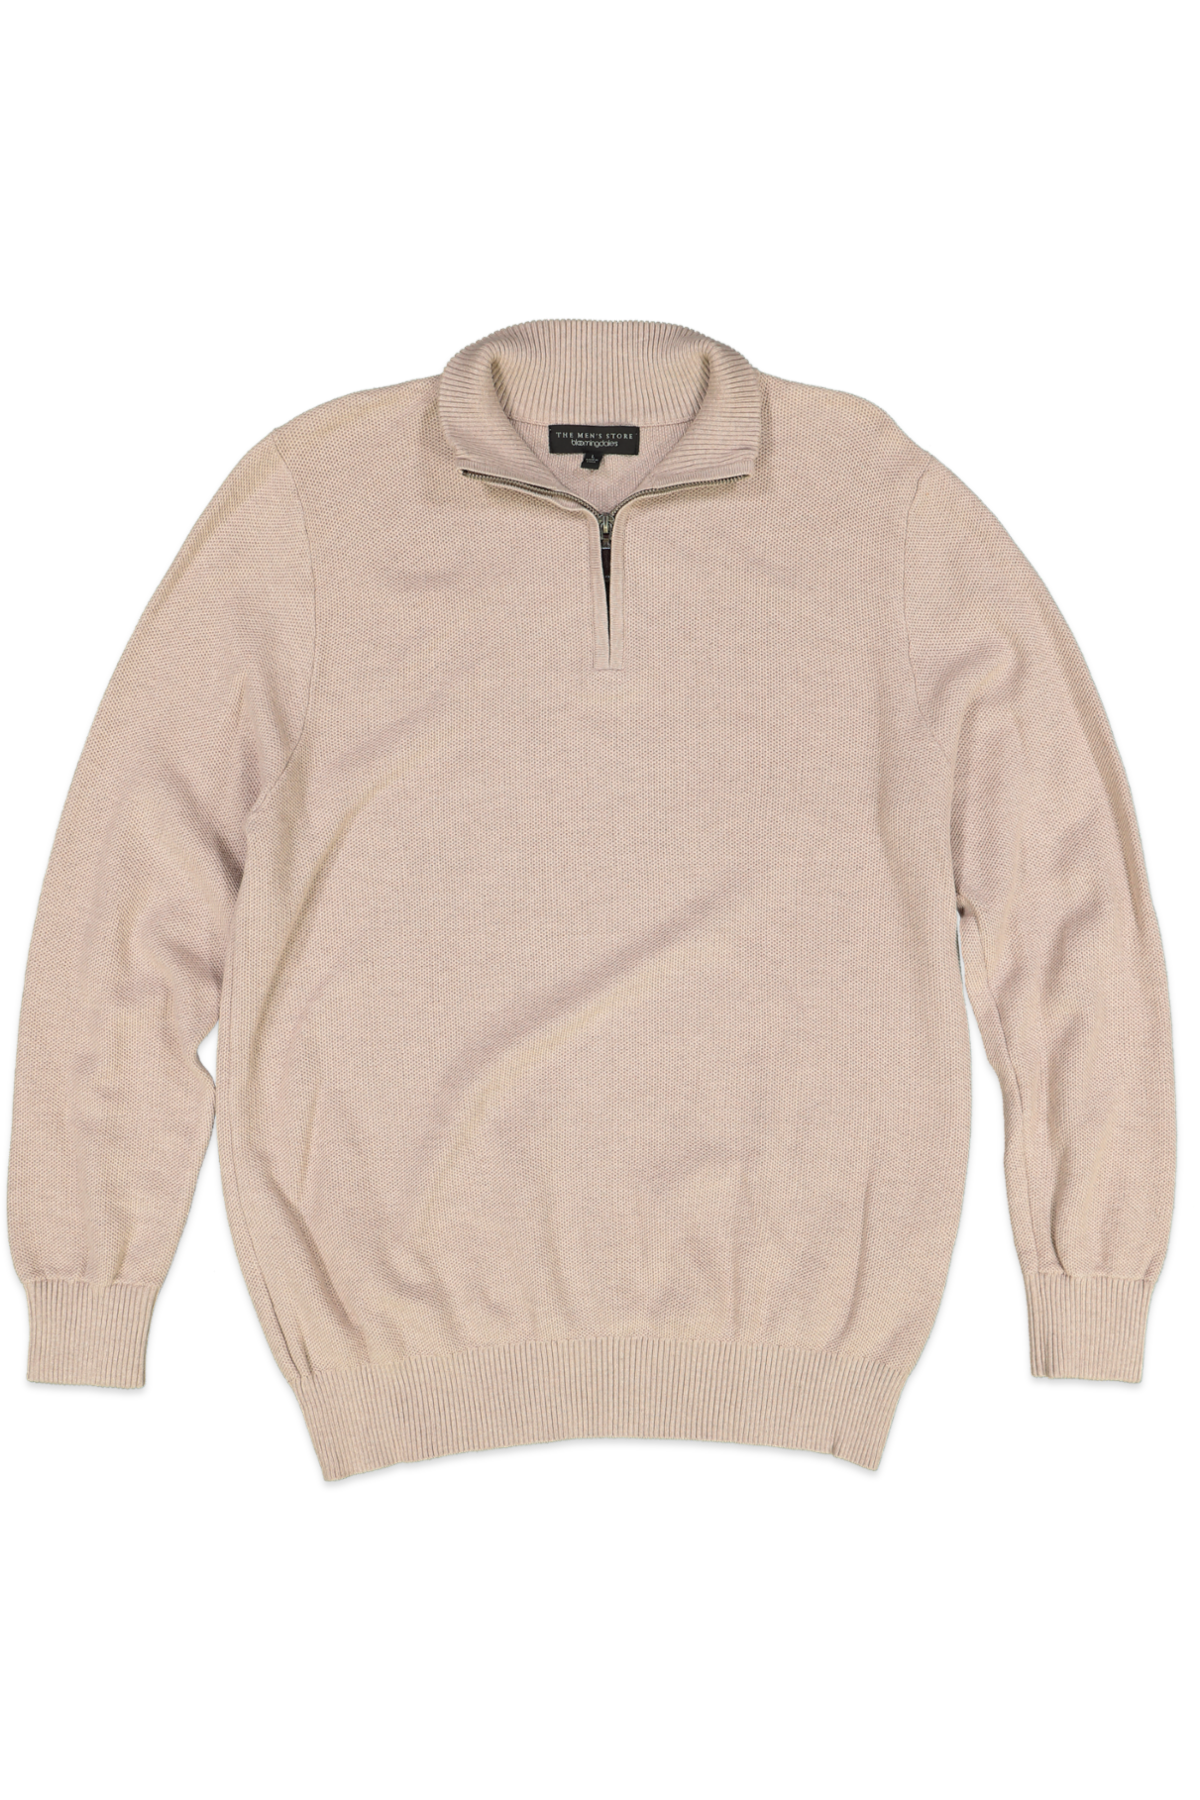 THE MENS STORE OATMEAL SWEATER